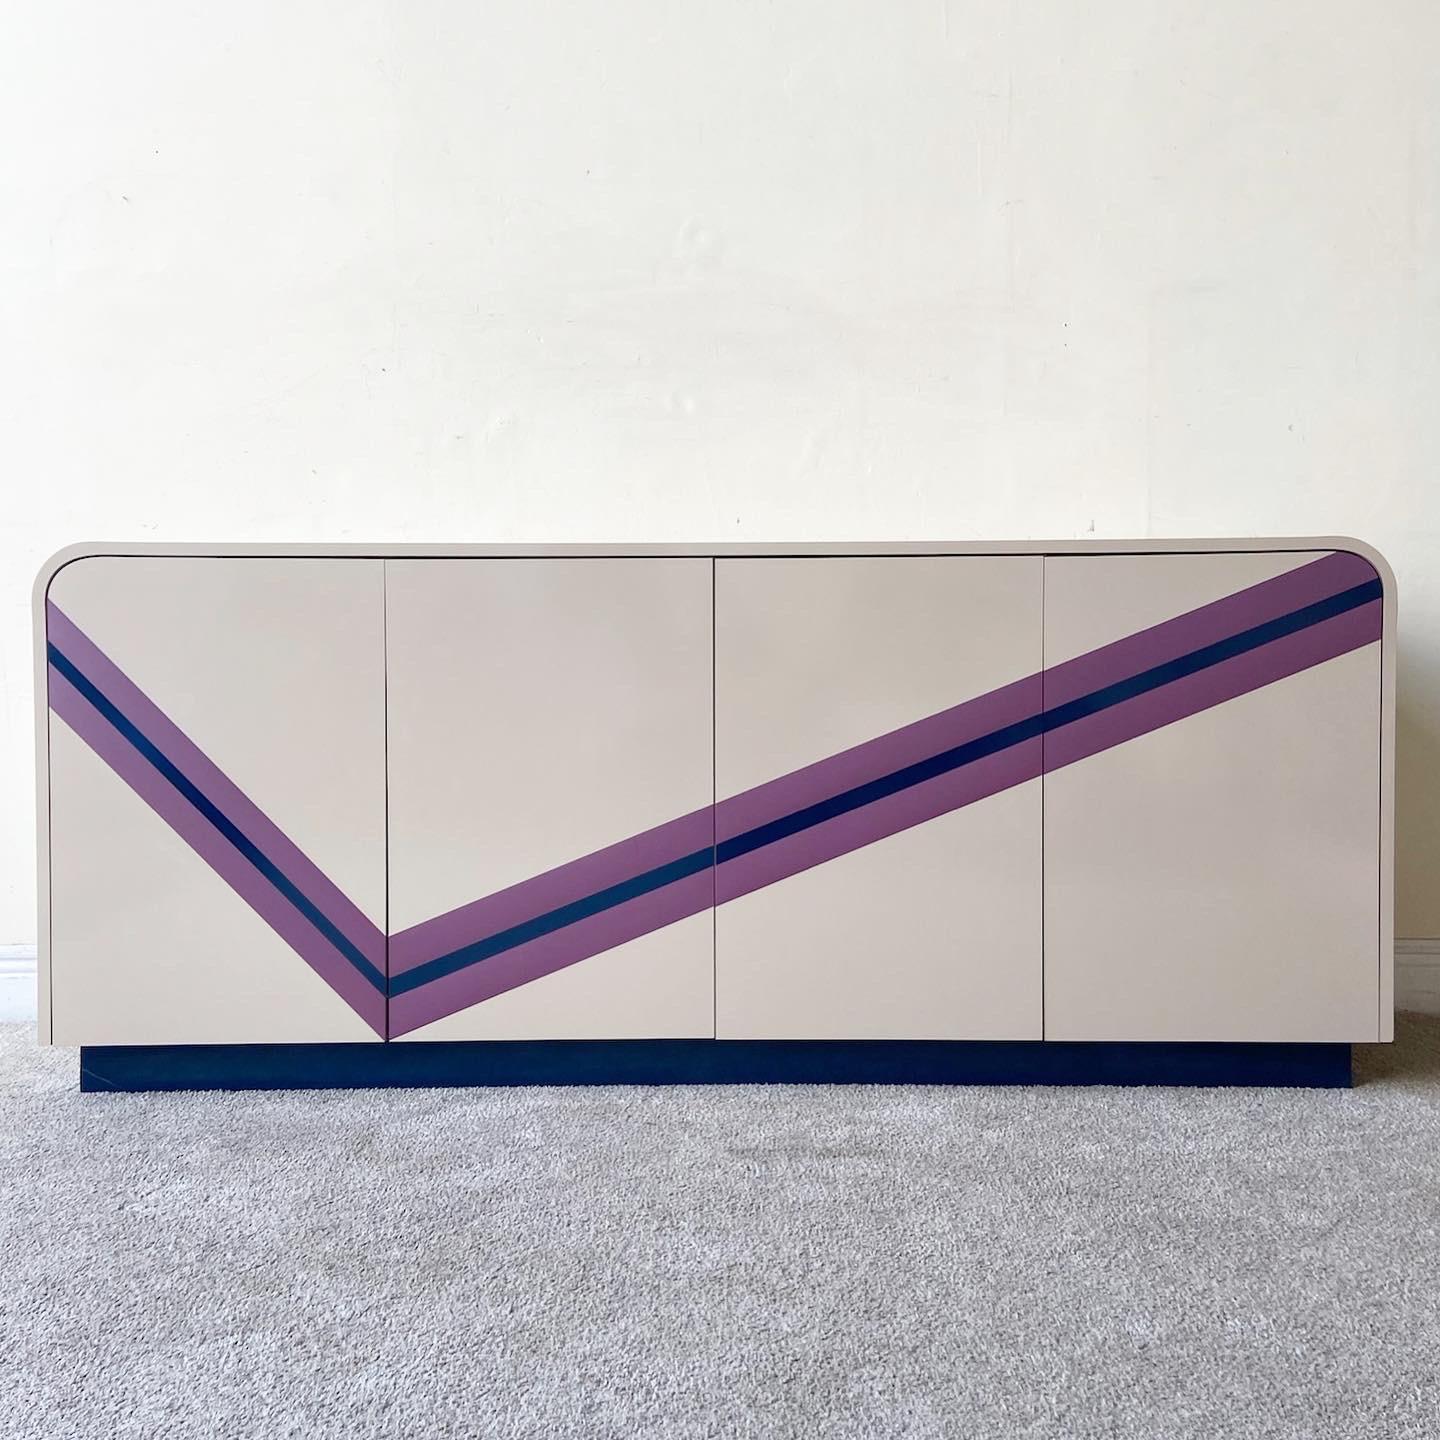 Incredible 1980s Postmodern Tan Lacquer Laminate waterfall credenza. Features 4 cabinet door which open to reveal shelved storage space and a section of 3 drawers. Displayed across the front of the piece is a purple and navy blue check.